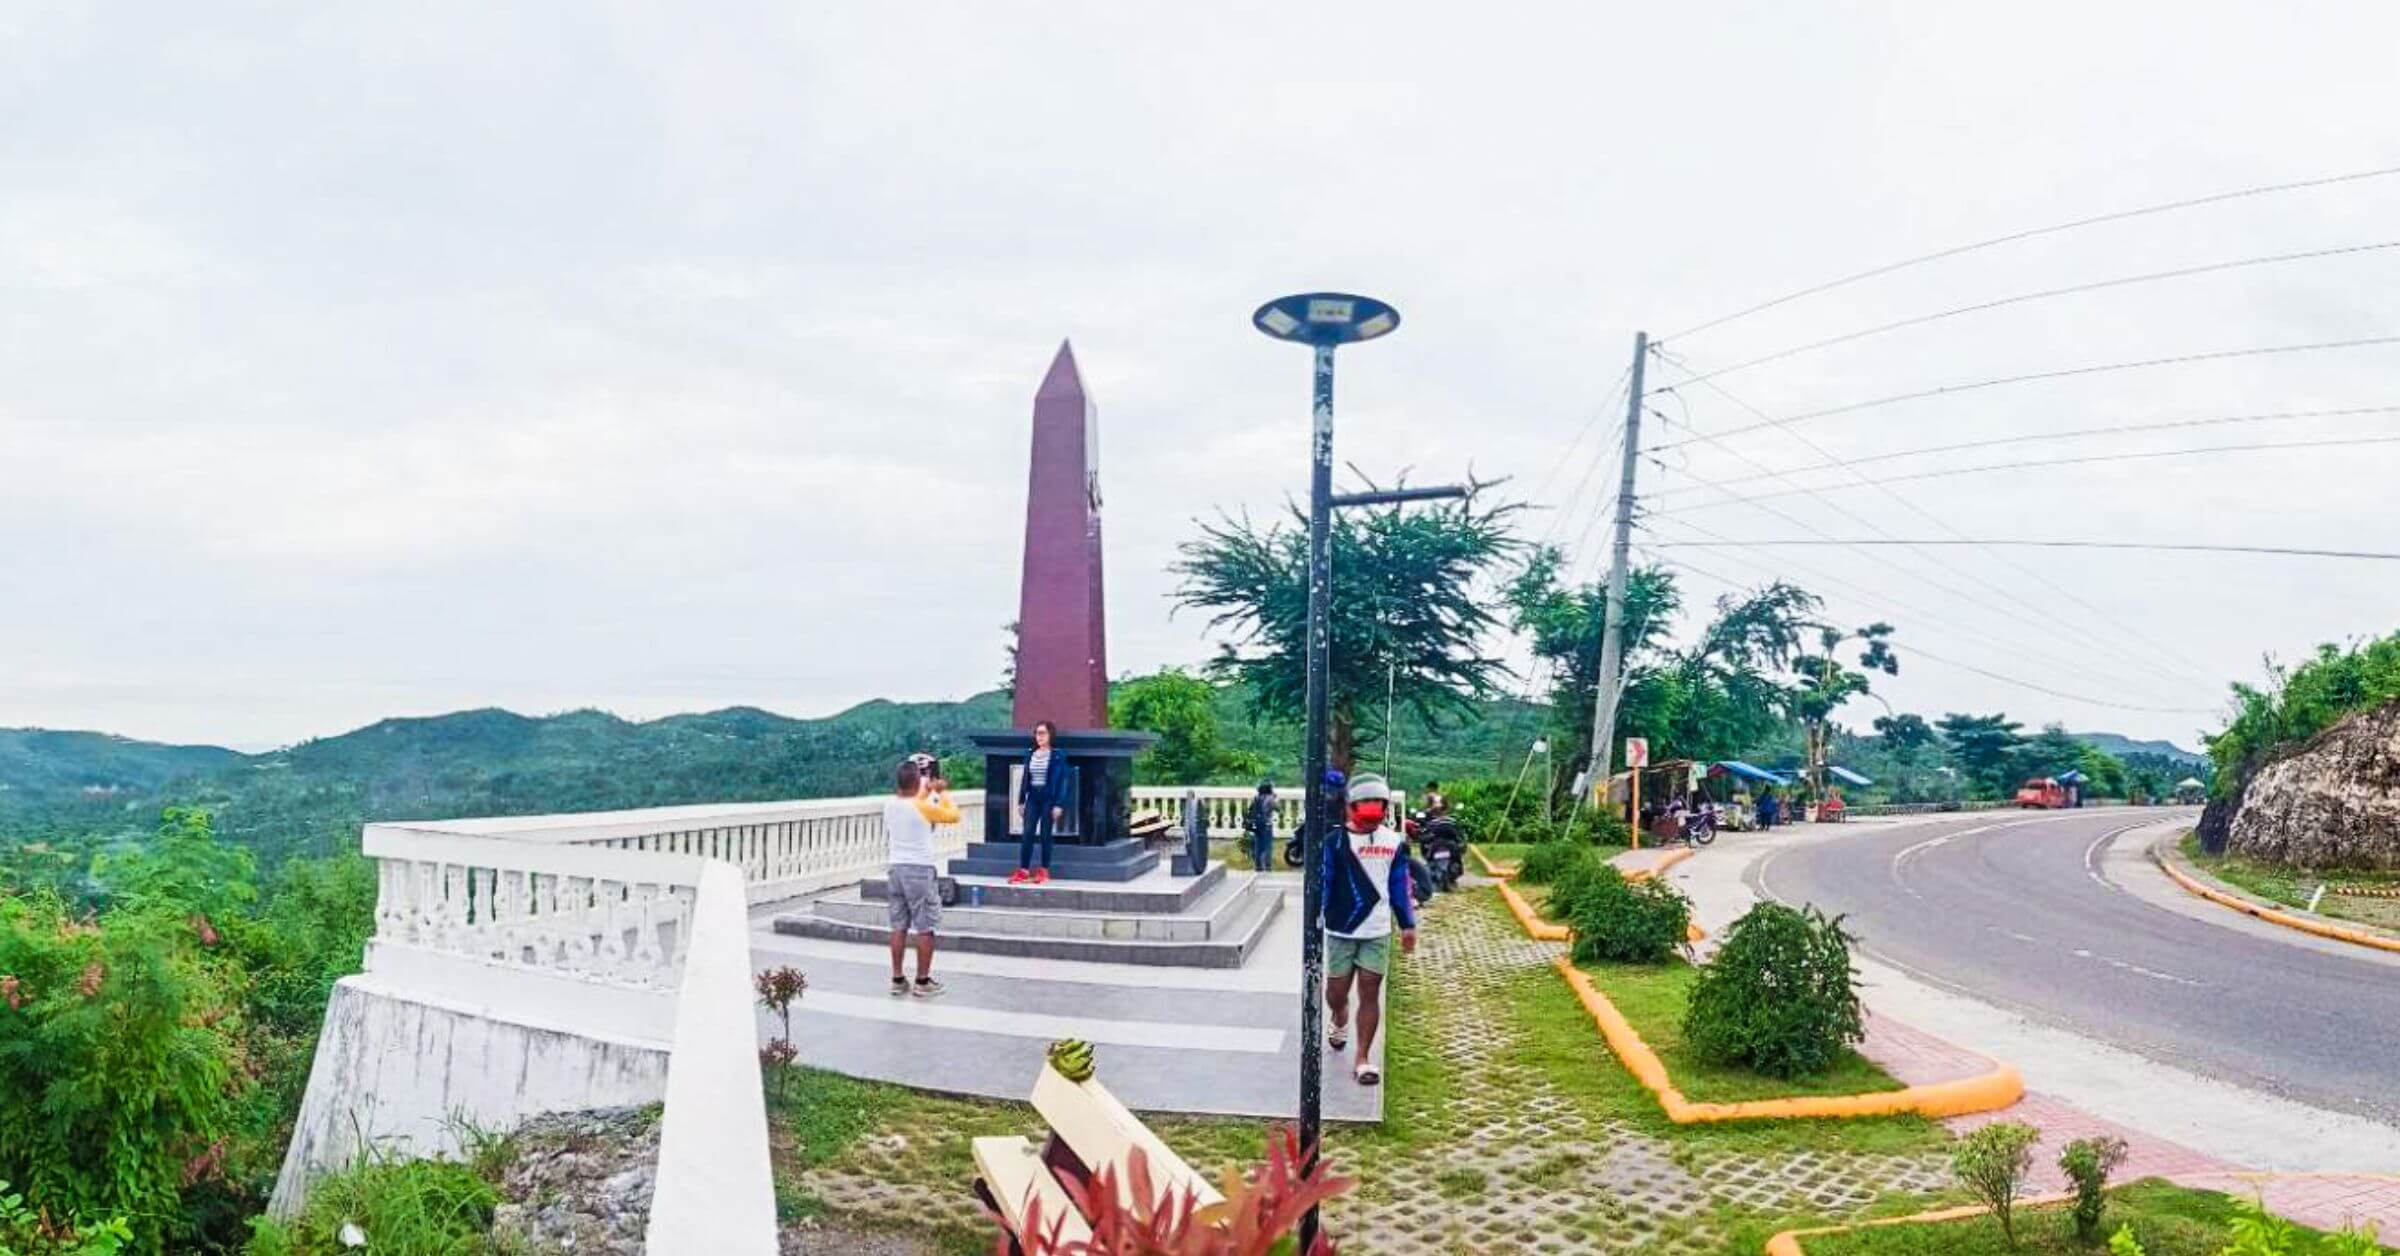 Carcar’s newest stop: Obelisk to honor Chief Justice Jose Abad Santos